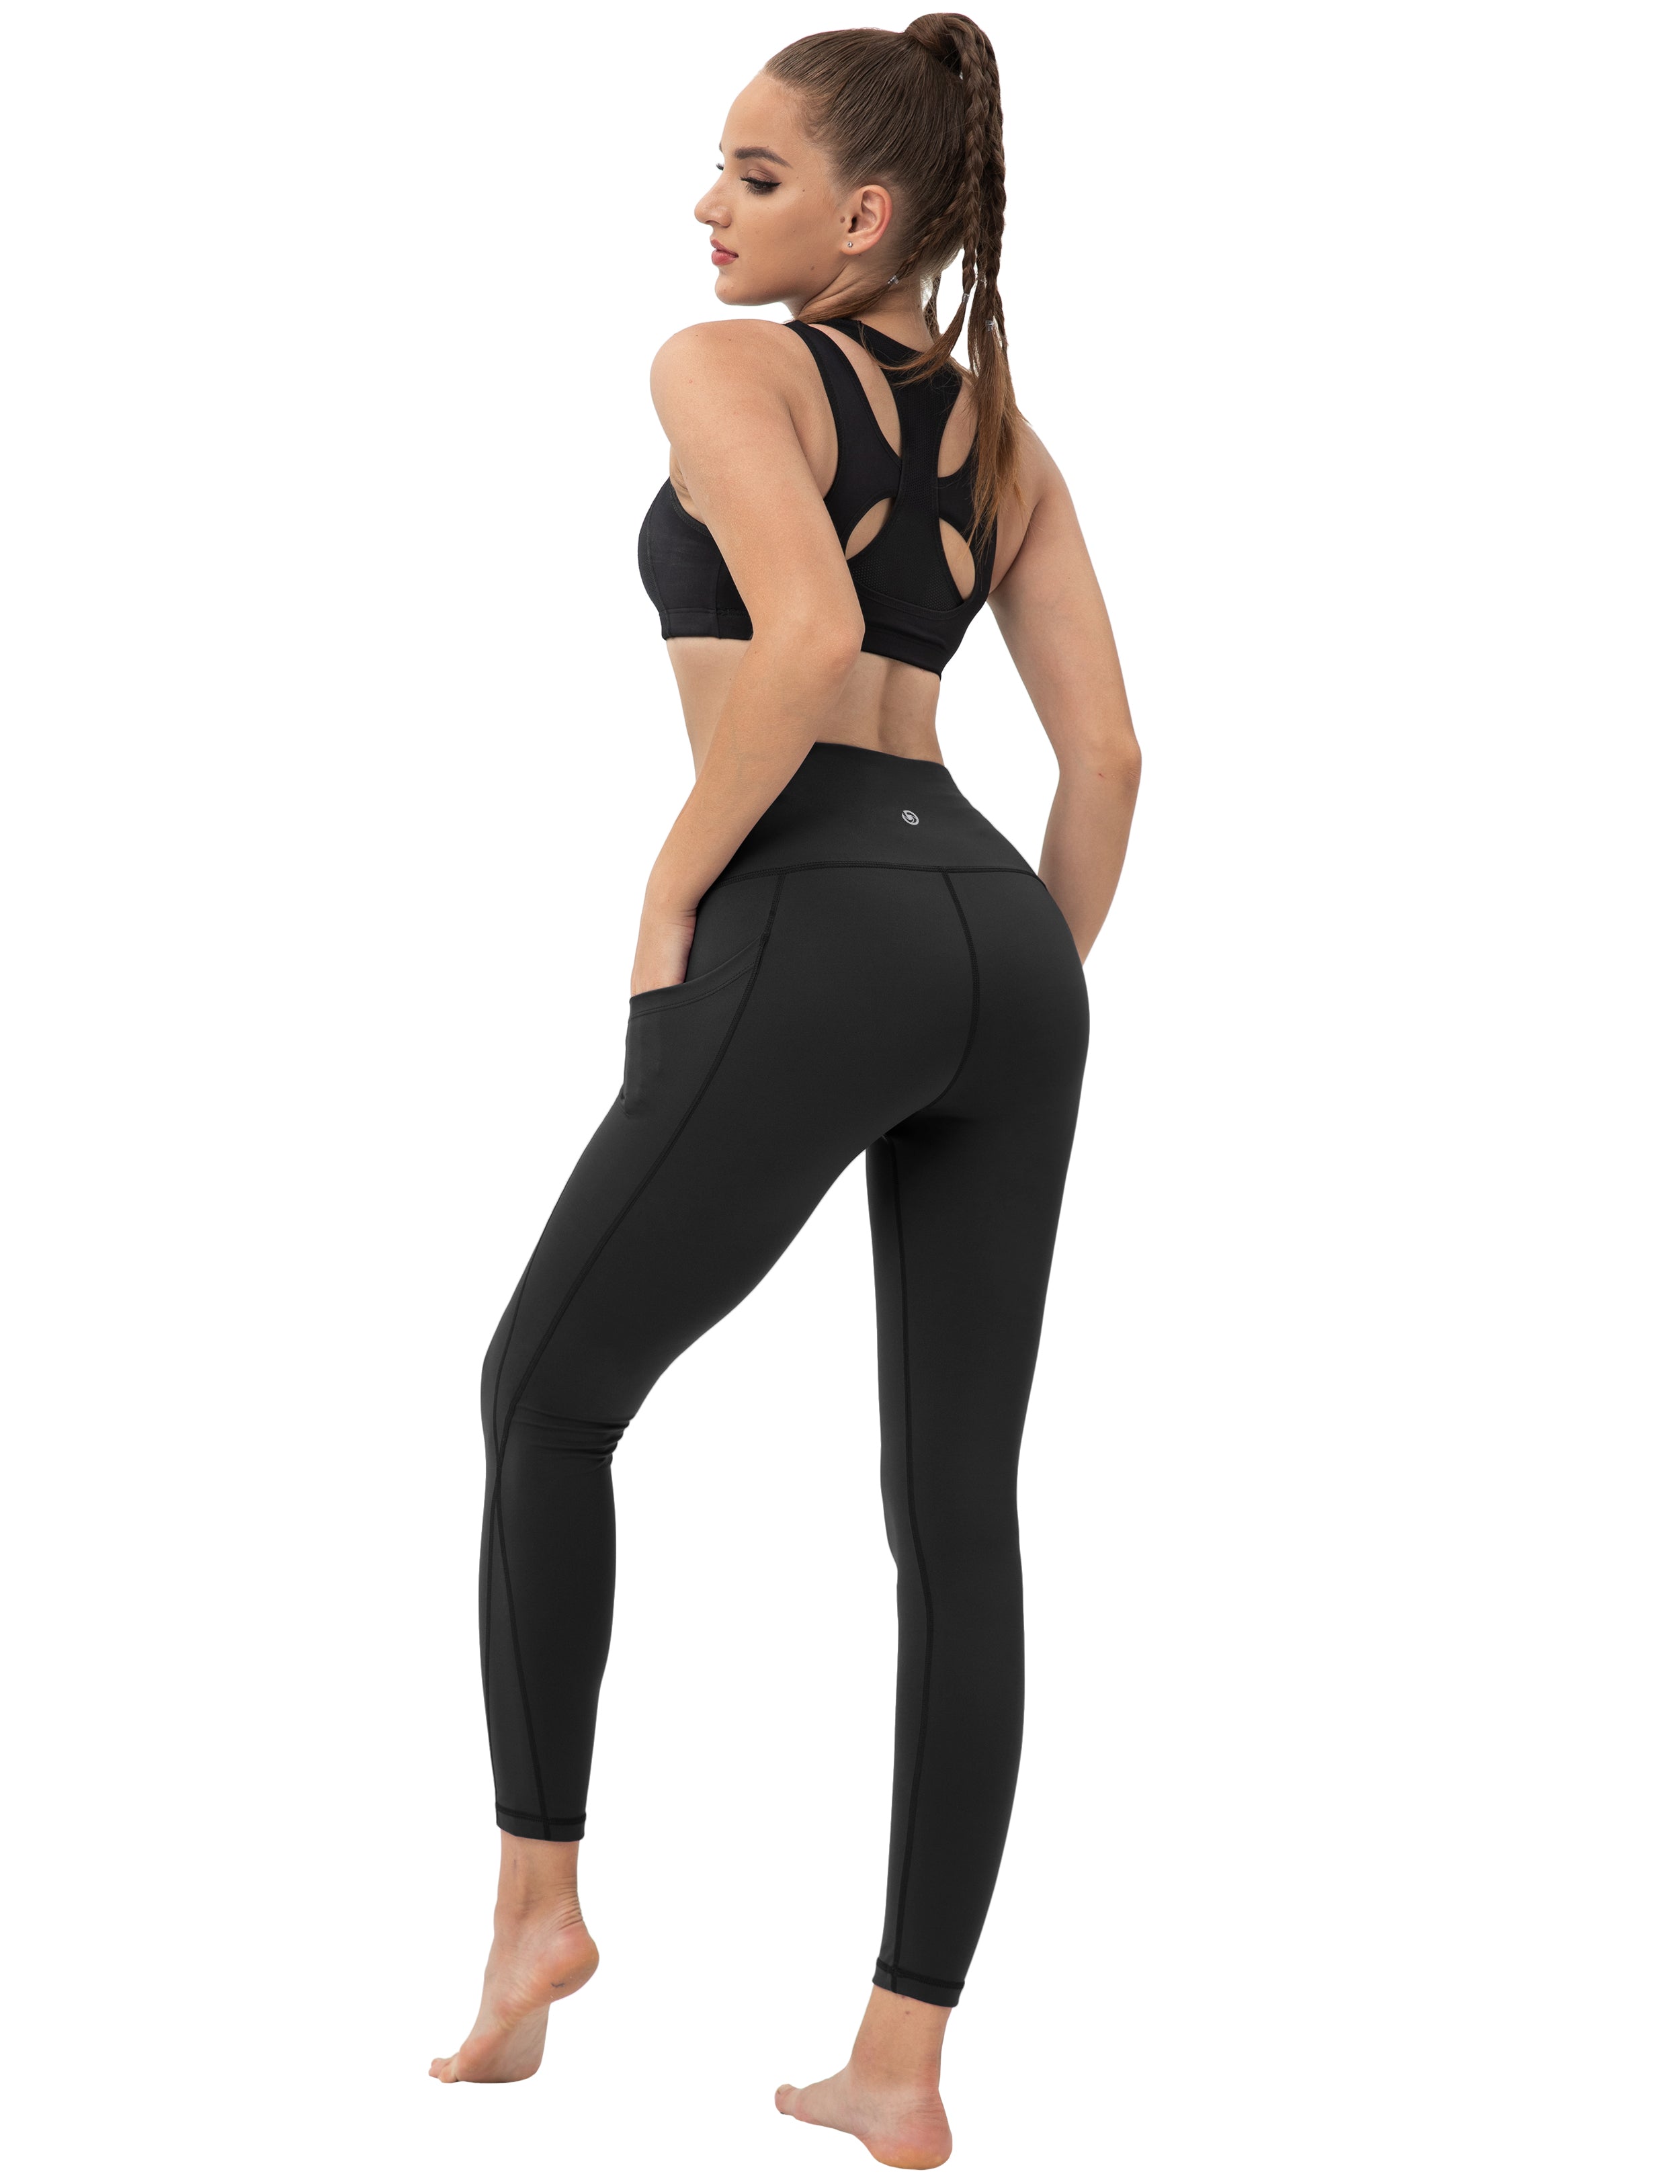 High Waist Side Pockets Plus Size Pants black 75% Nylon, 25% Spandex Fabric doesn't attract lint easily 4-way stretch No see-through Moisture-wicking Tummy control Inner pocket